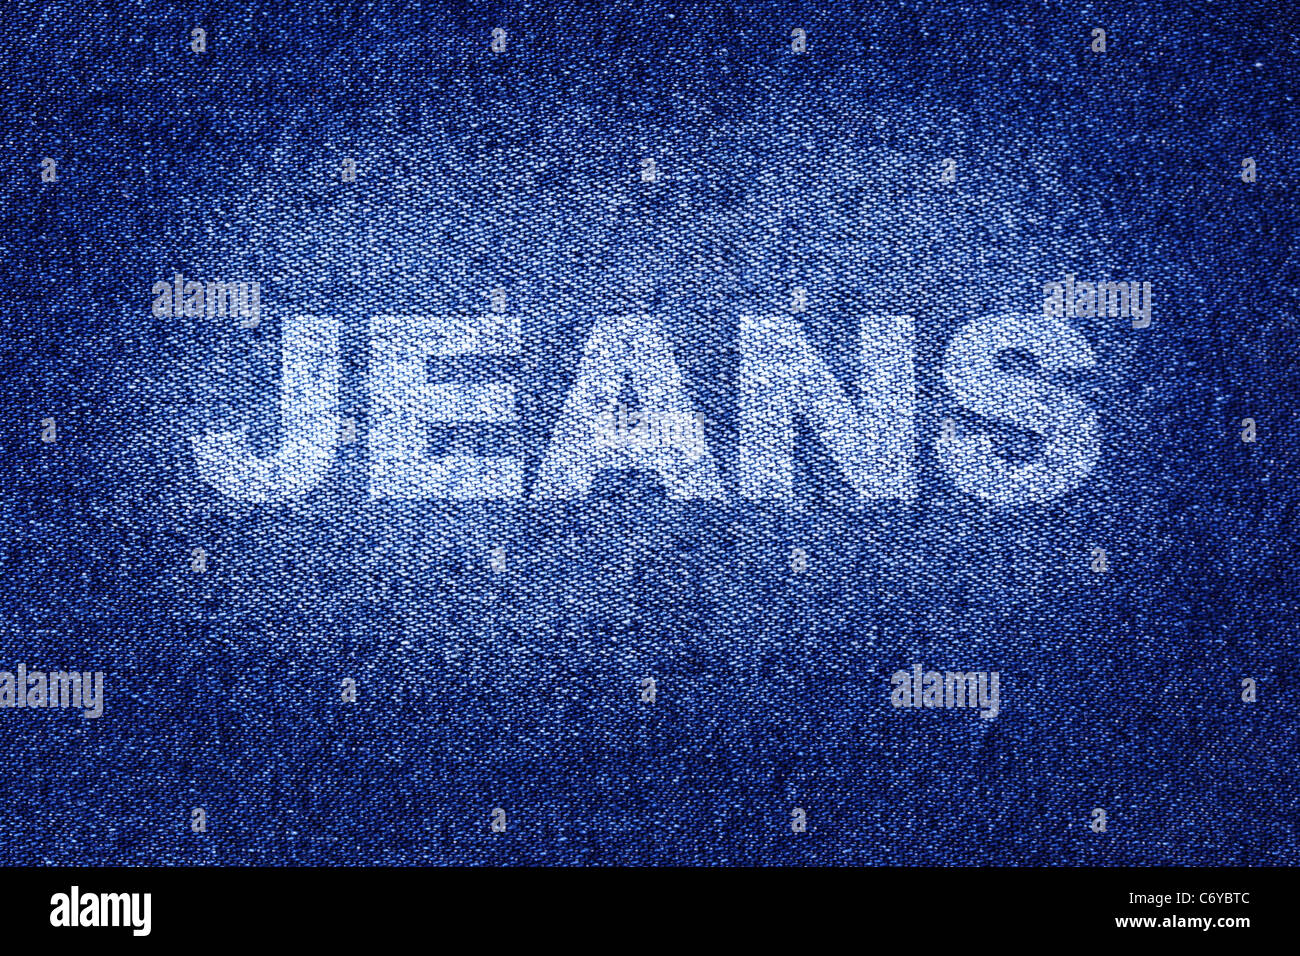 Blue jean texture with the 